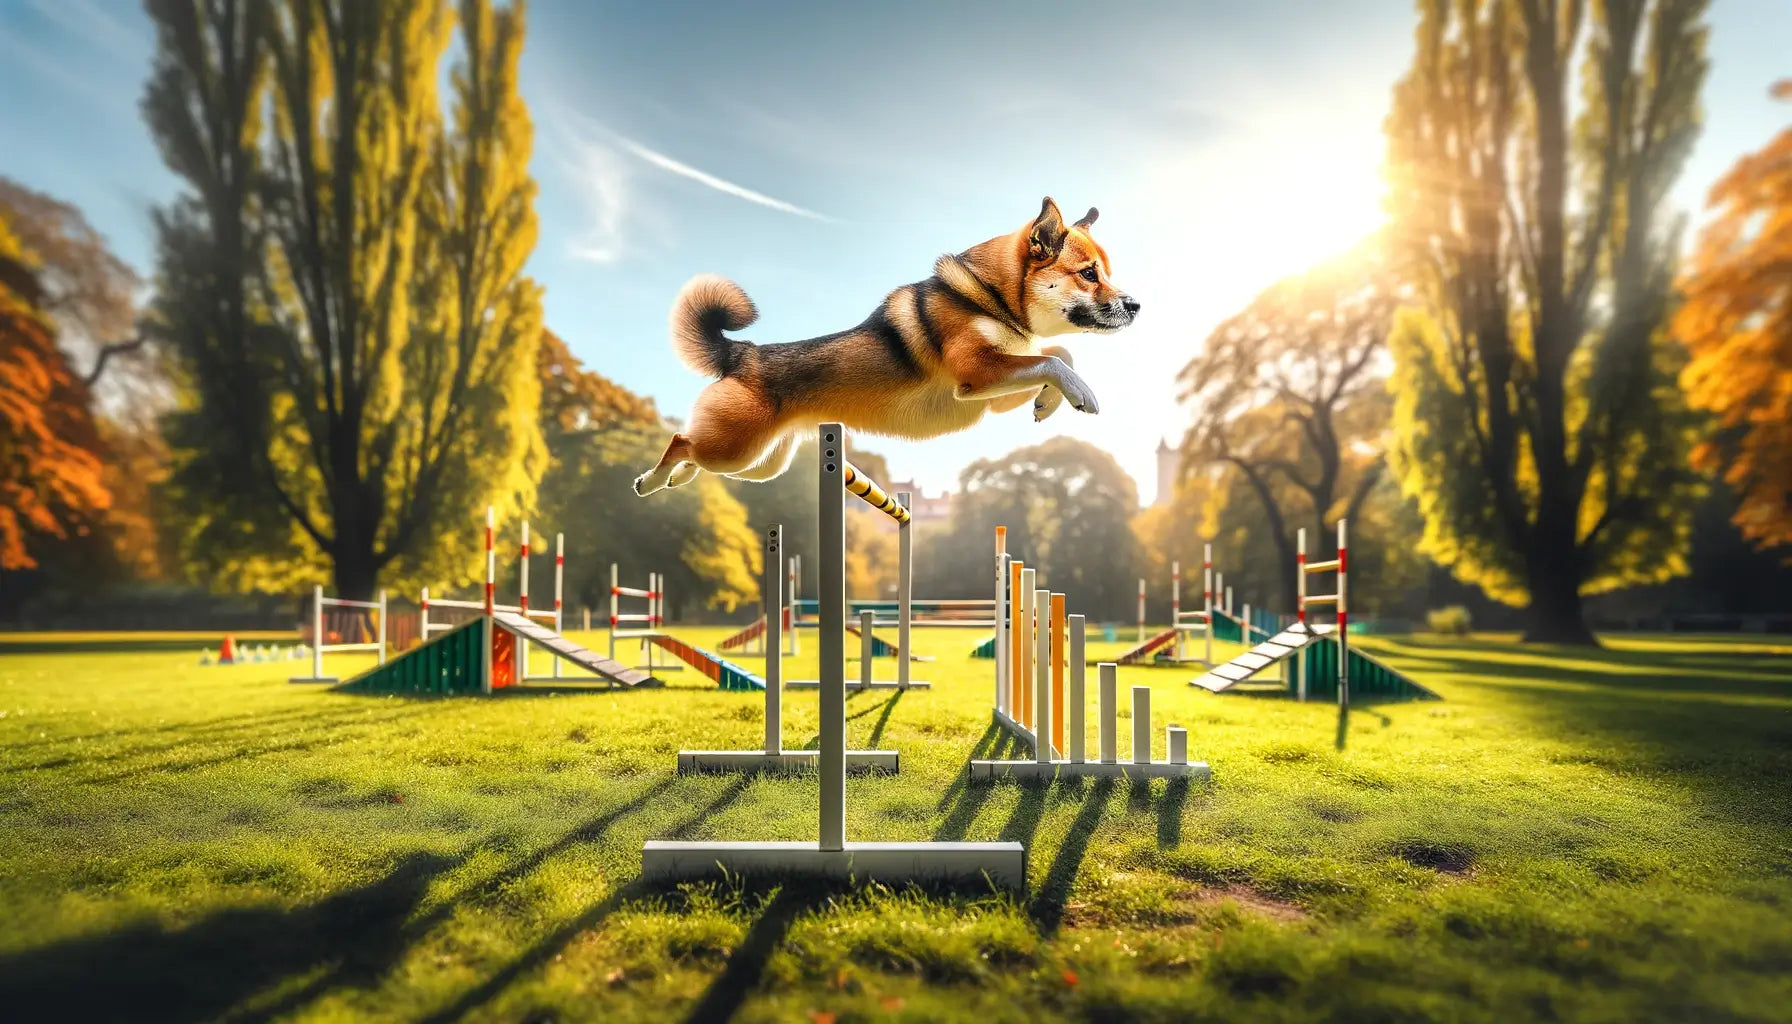 Potcake Dog engaged in agility training, leaping over a hurdle in a scenic park, showcasing its agility and strength.